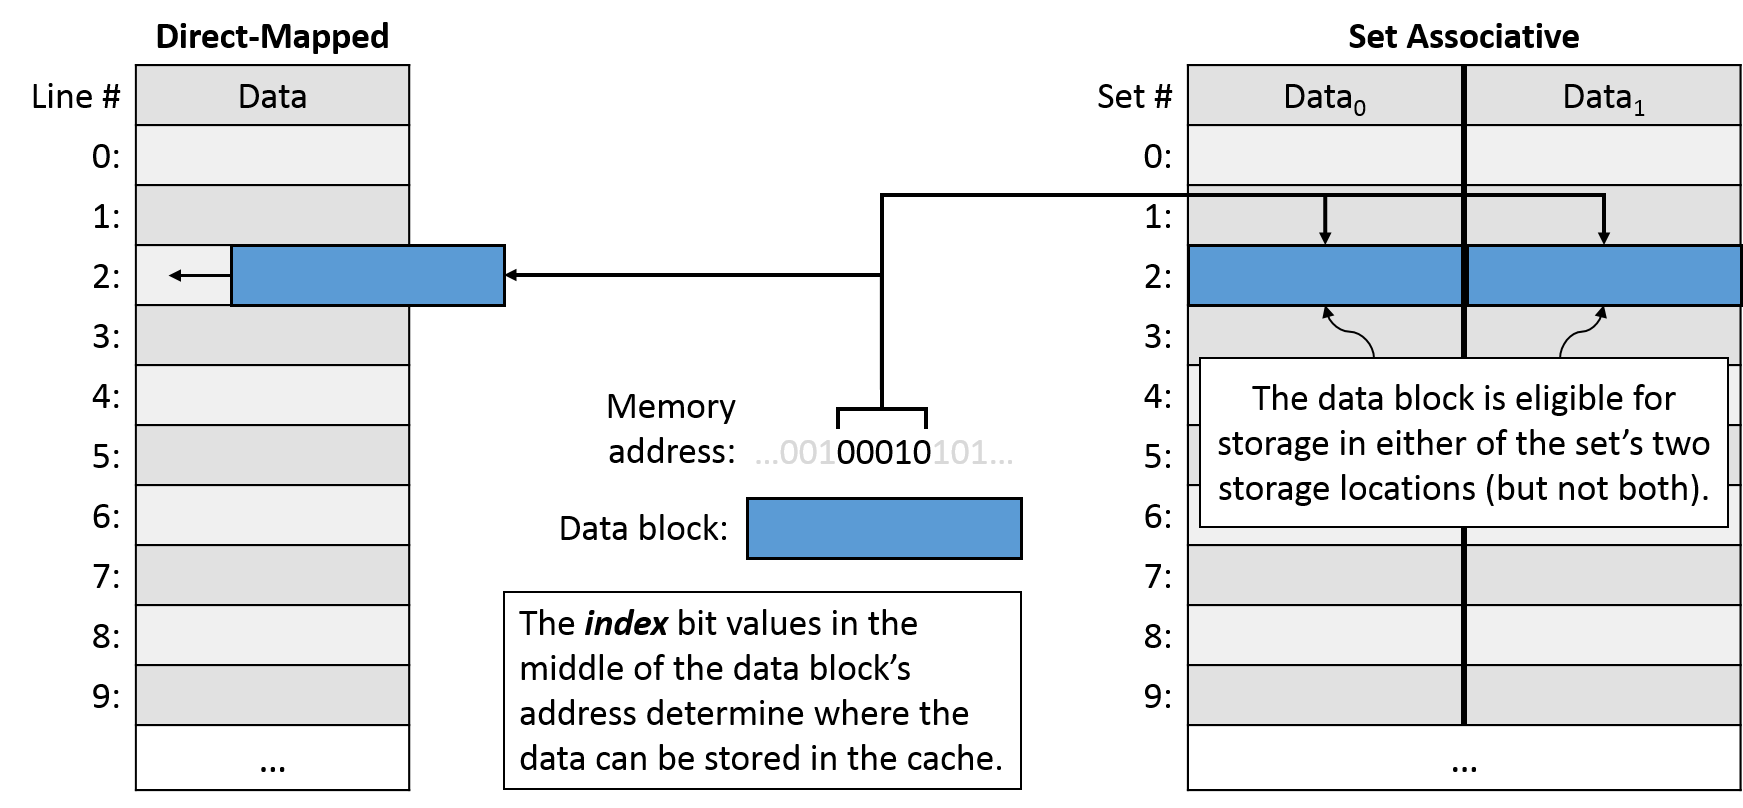 The index bit values in the middle of the data block's address determine where the data can be stored in the cache.  In a direct-mapped cache, the data can only be stored in one place, the line the index refers to.  In a set associative cache, the data is eligible to be stored in any of the storage locations of the set its index maps to.